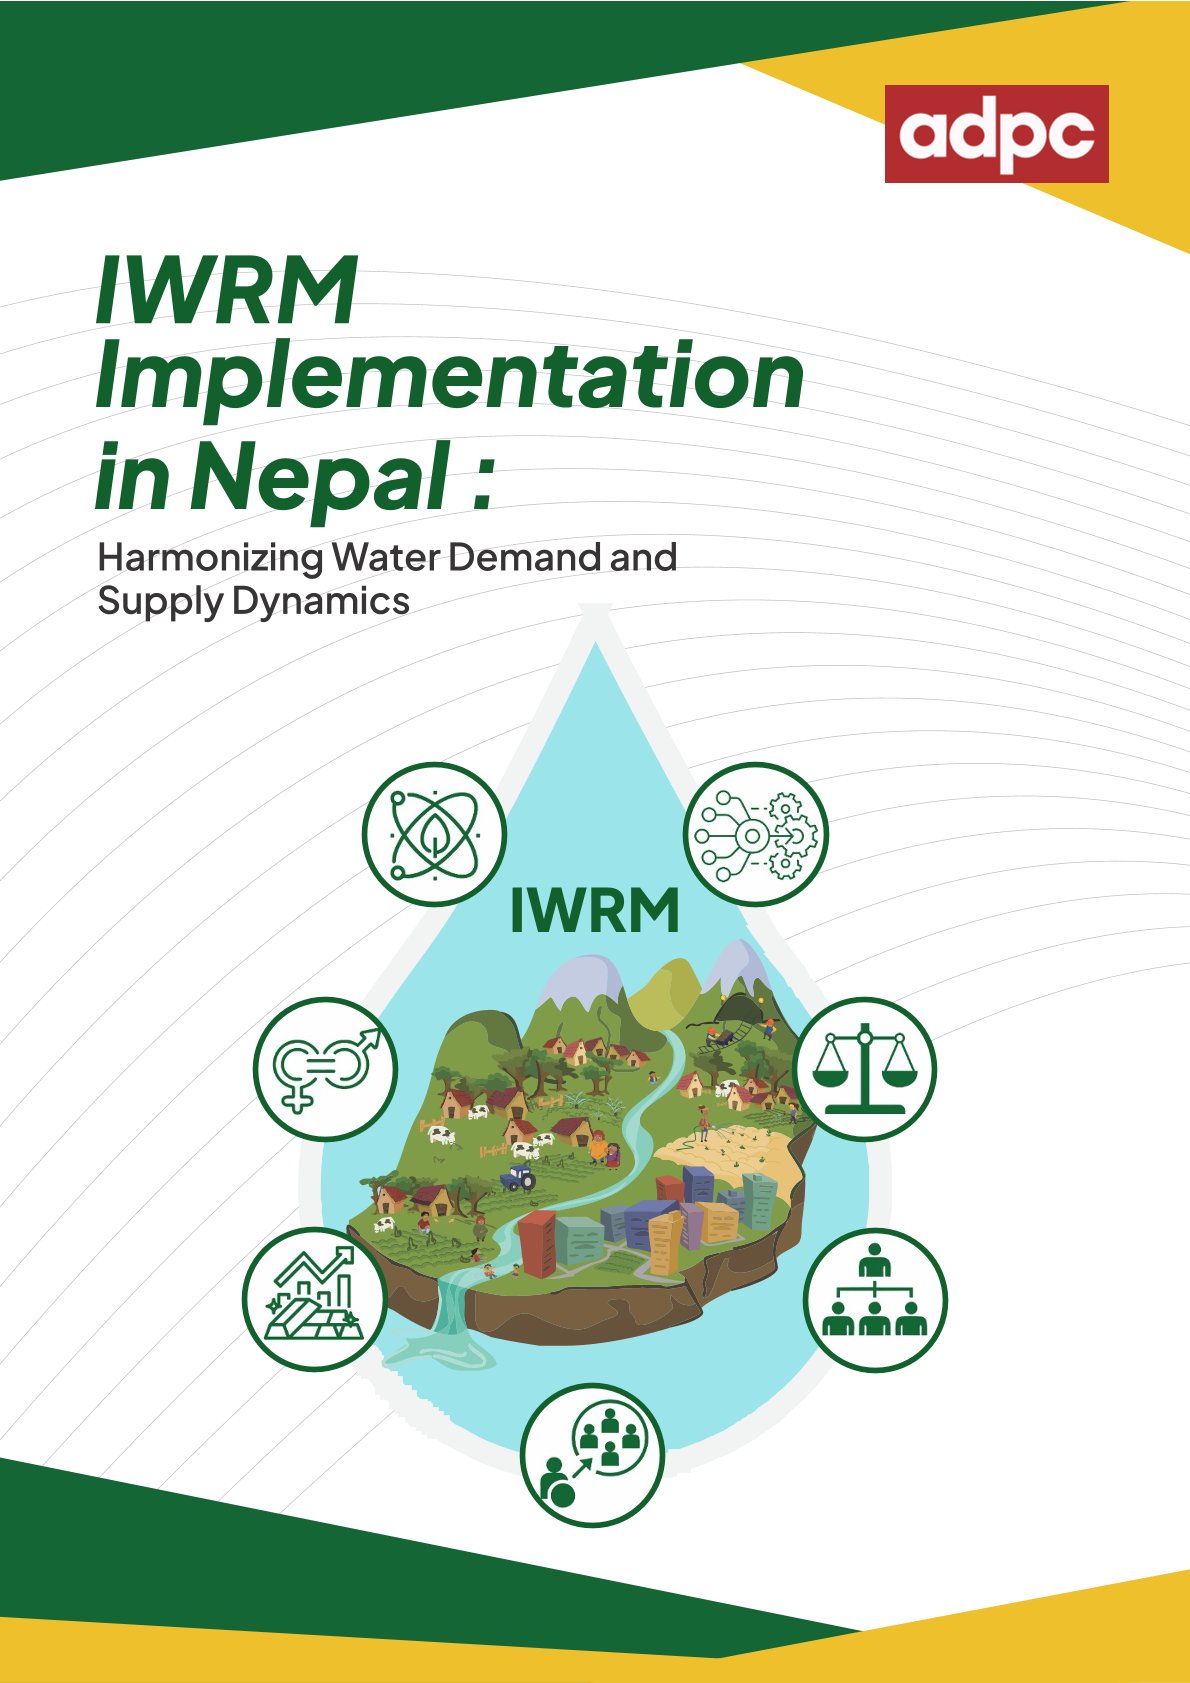 IWRM Implementation in Nepal: Harmonizing Water Demand and Supply Dynamics